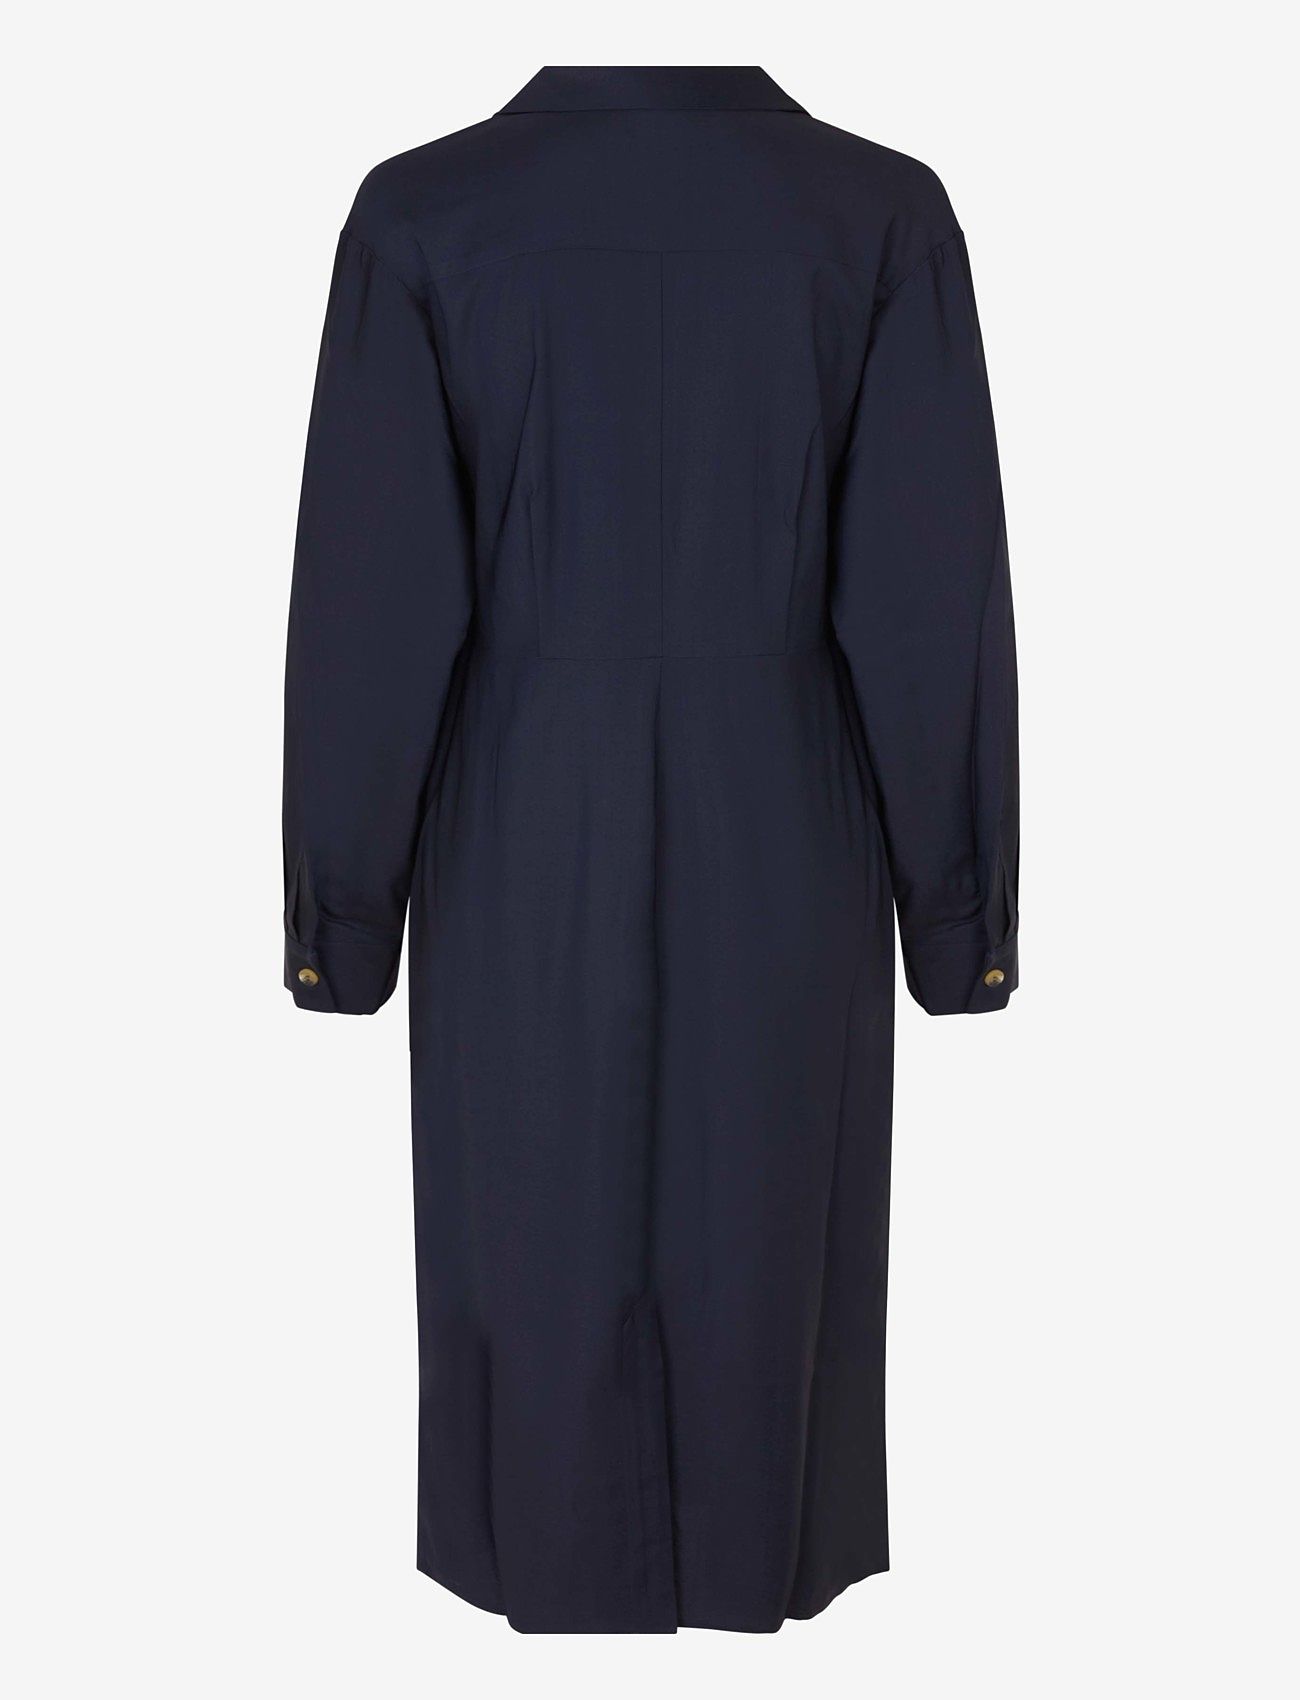 Navy shirt dress with long sleeves and knotted front